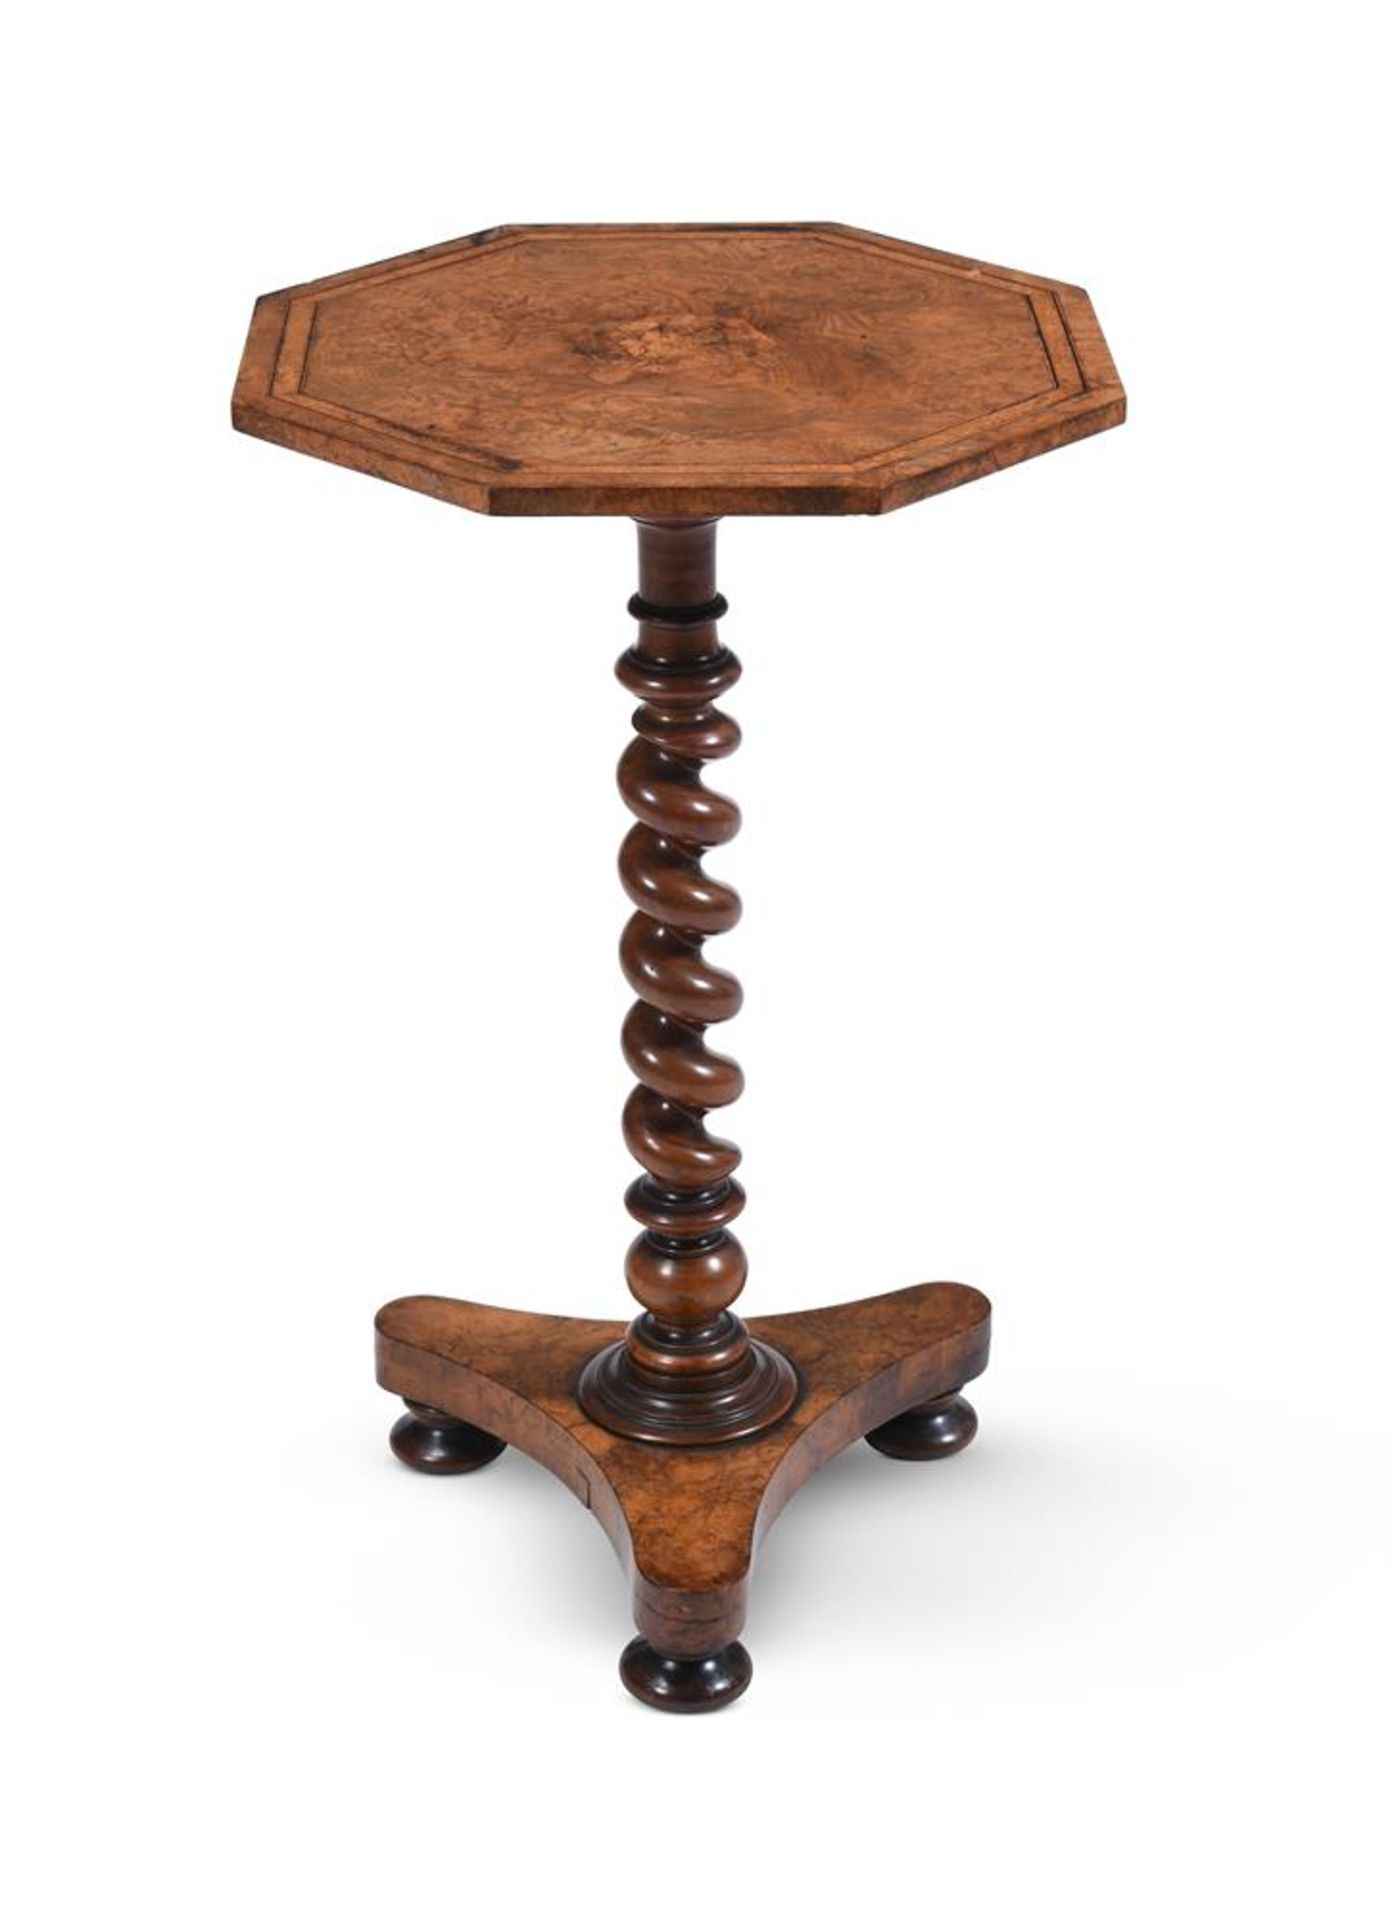 A BURR WALNUT AND MARQUETRY OCTAGONAL TABLE, 19TH CENTURY